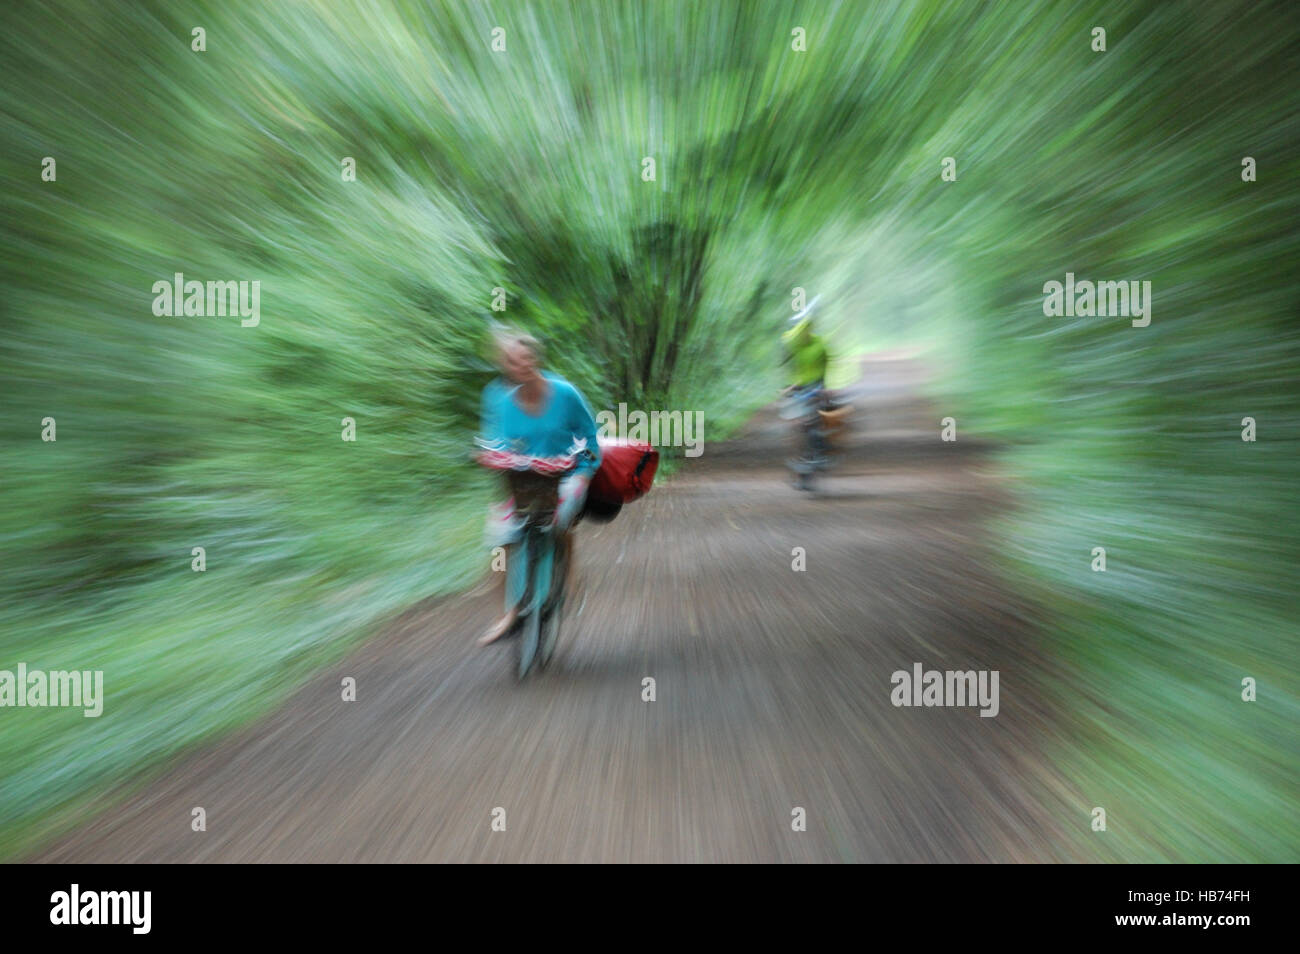 Two cyclists a man and a woman on a cyclepath taken with a long exposure whilst zooming to give the impression of speed. Stock Photo